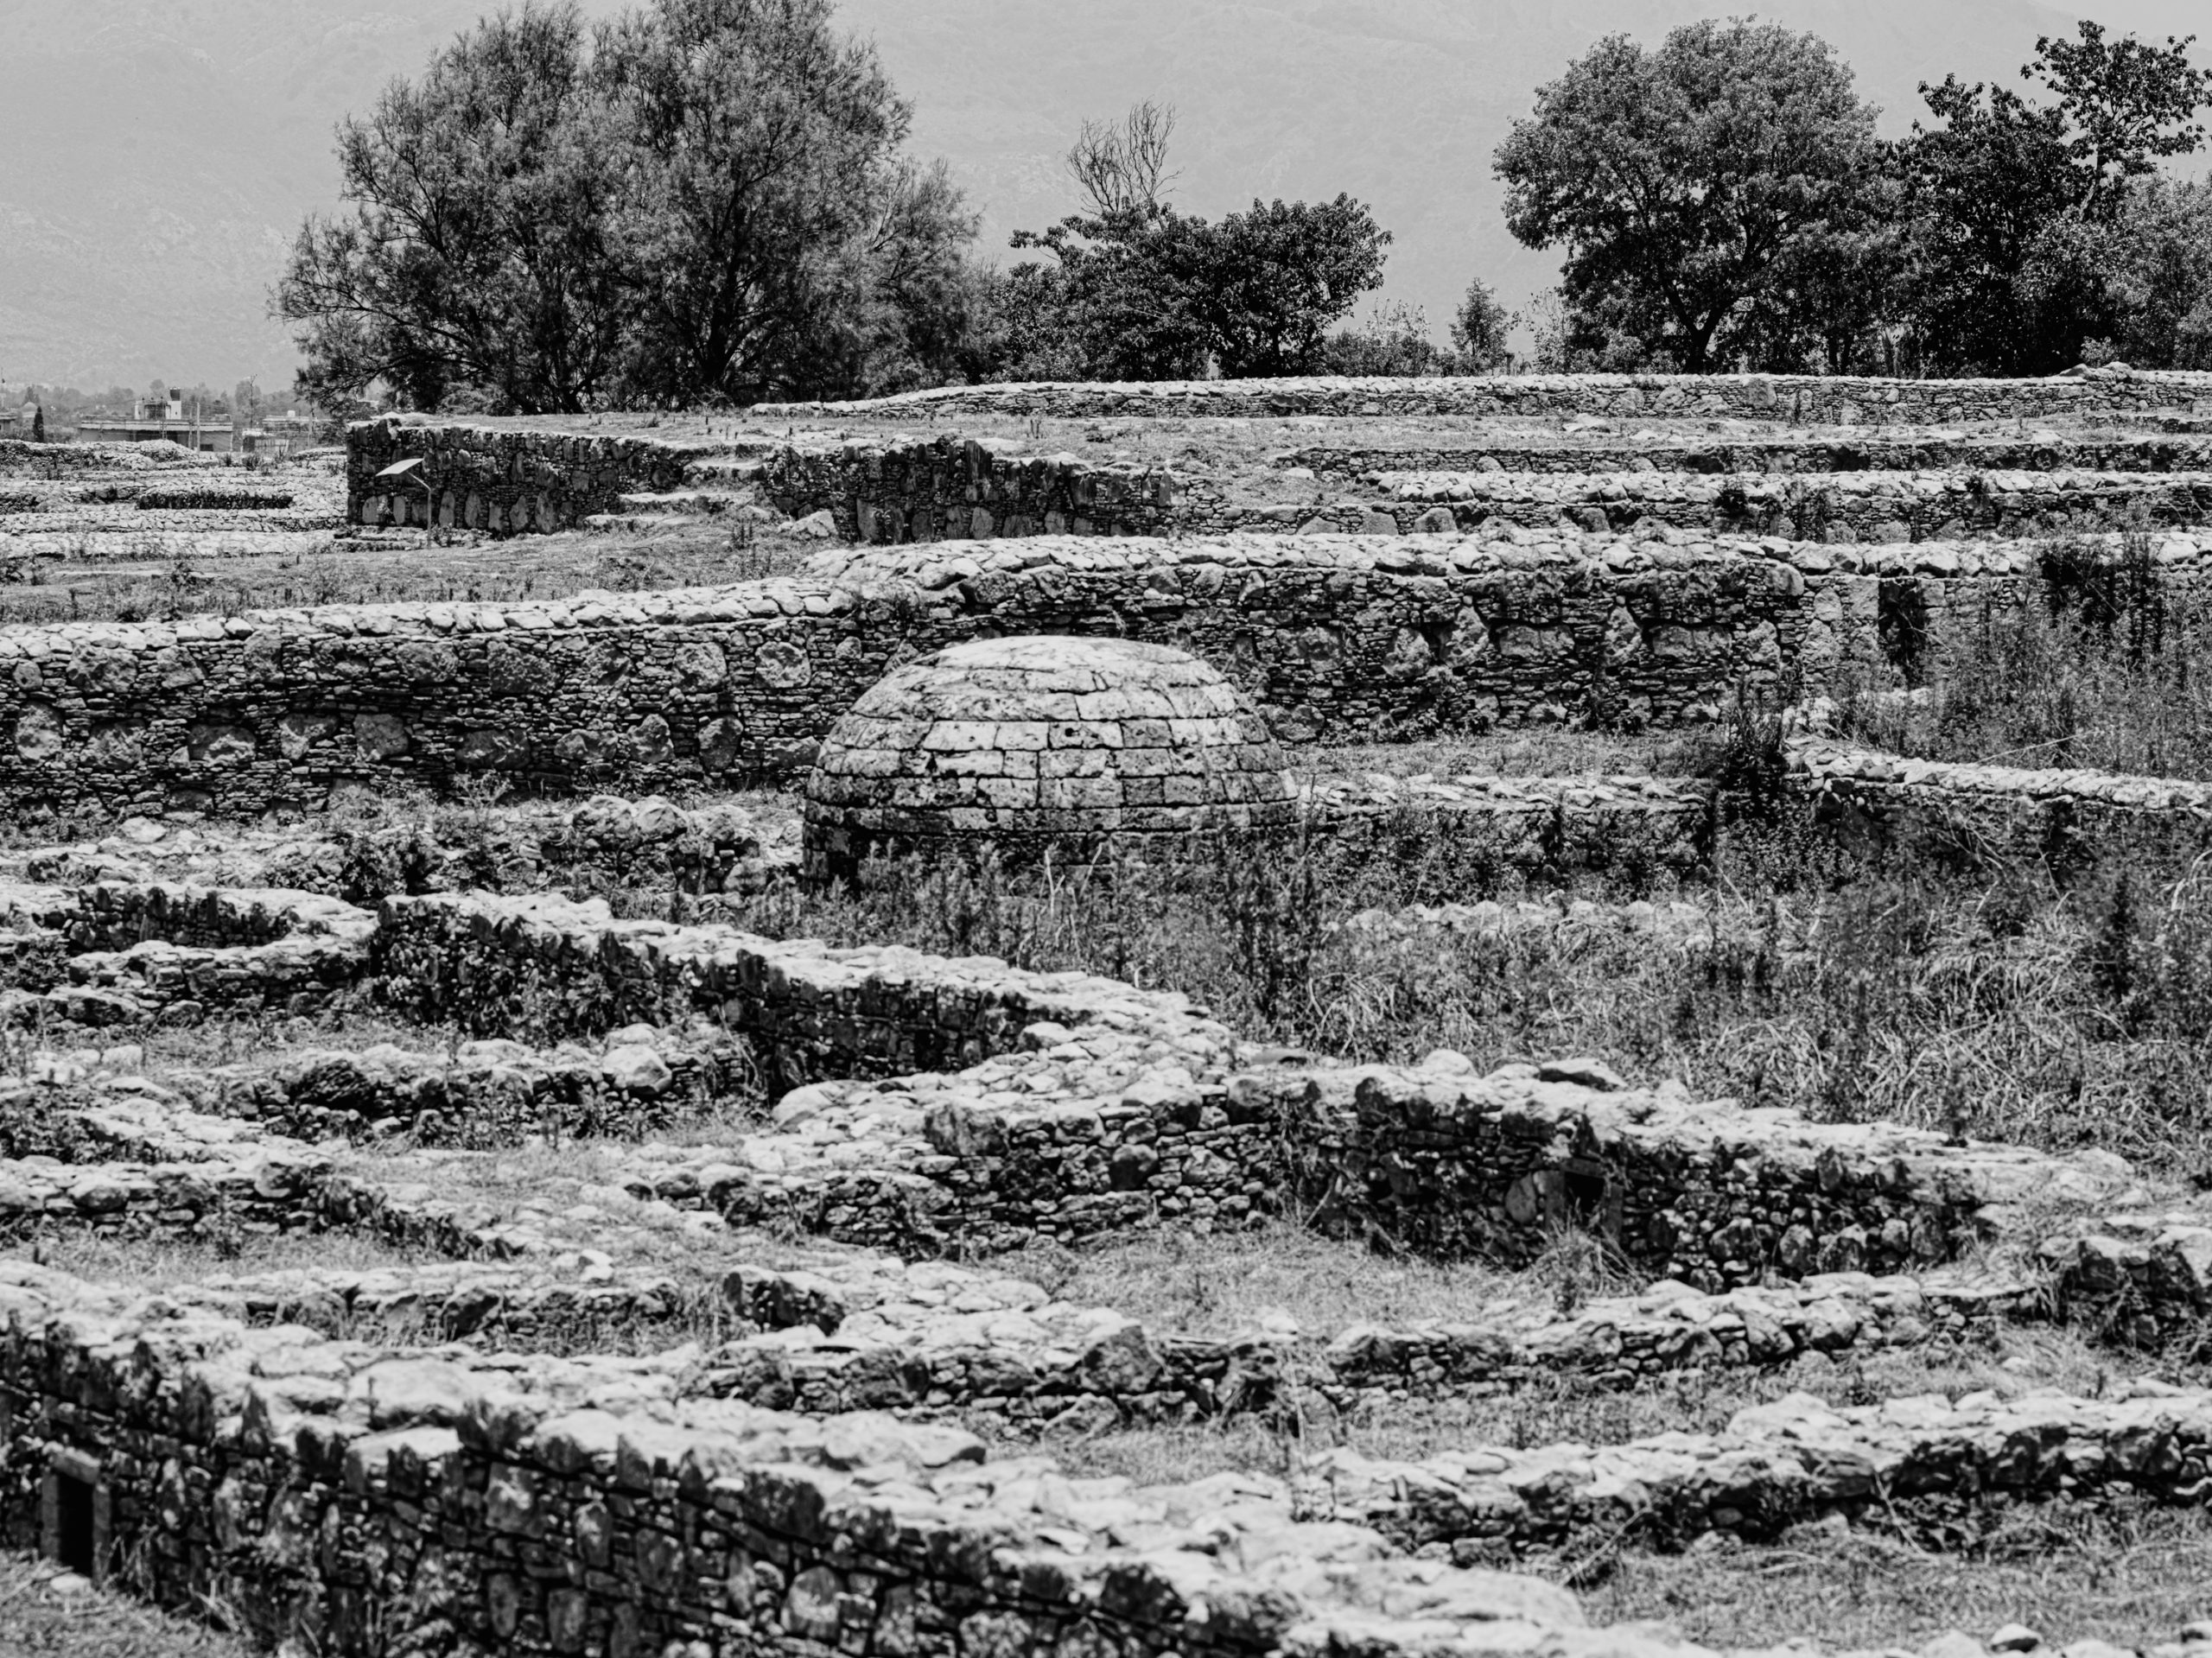 A black and white photograph of a Stupa at the ancient city of Sirkap, Pakistan